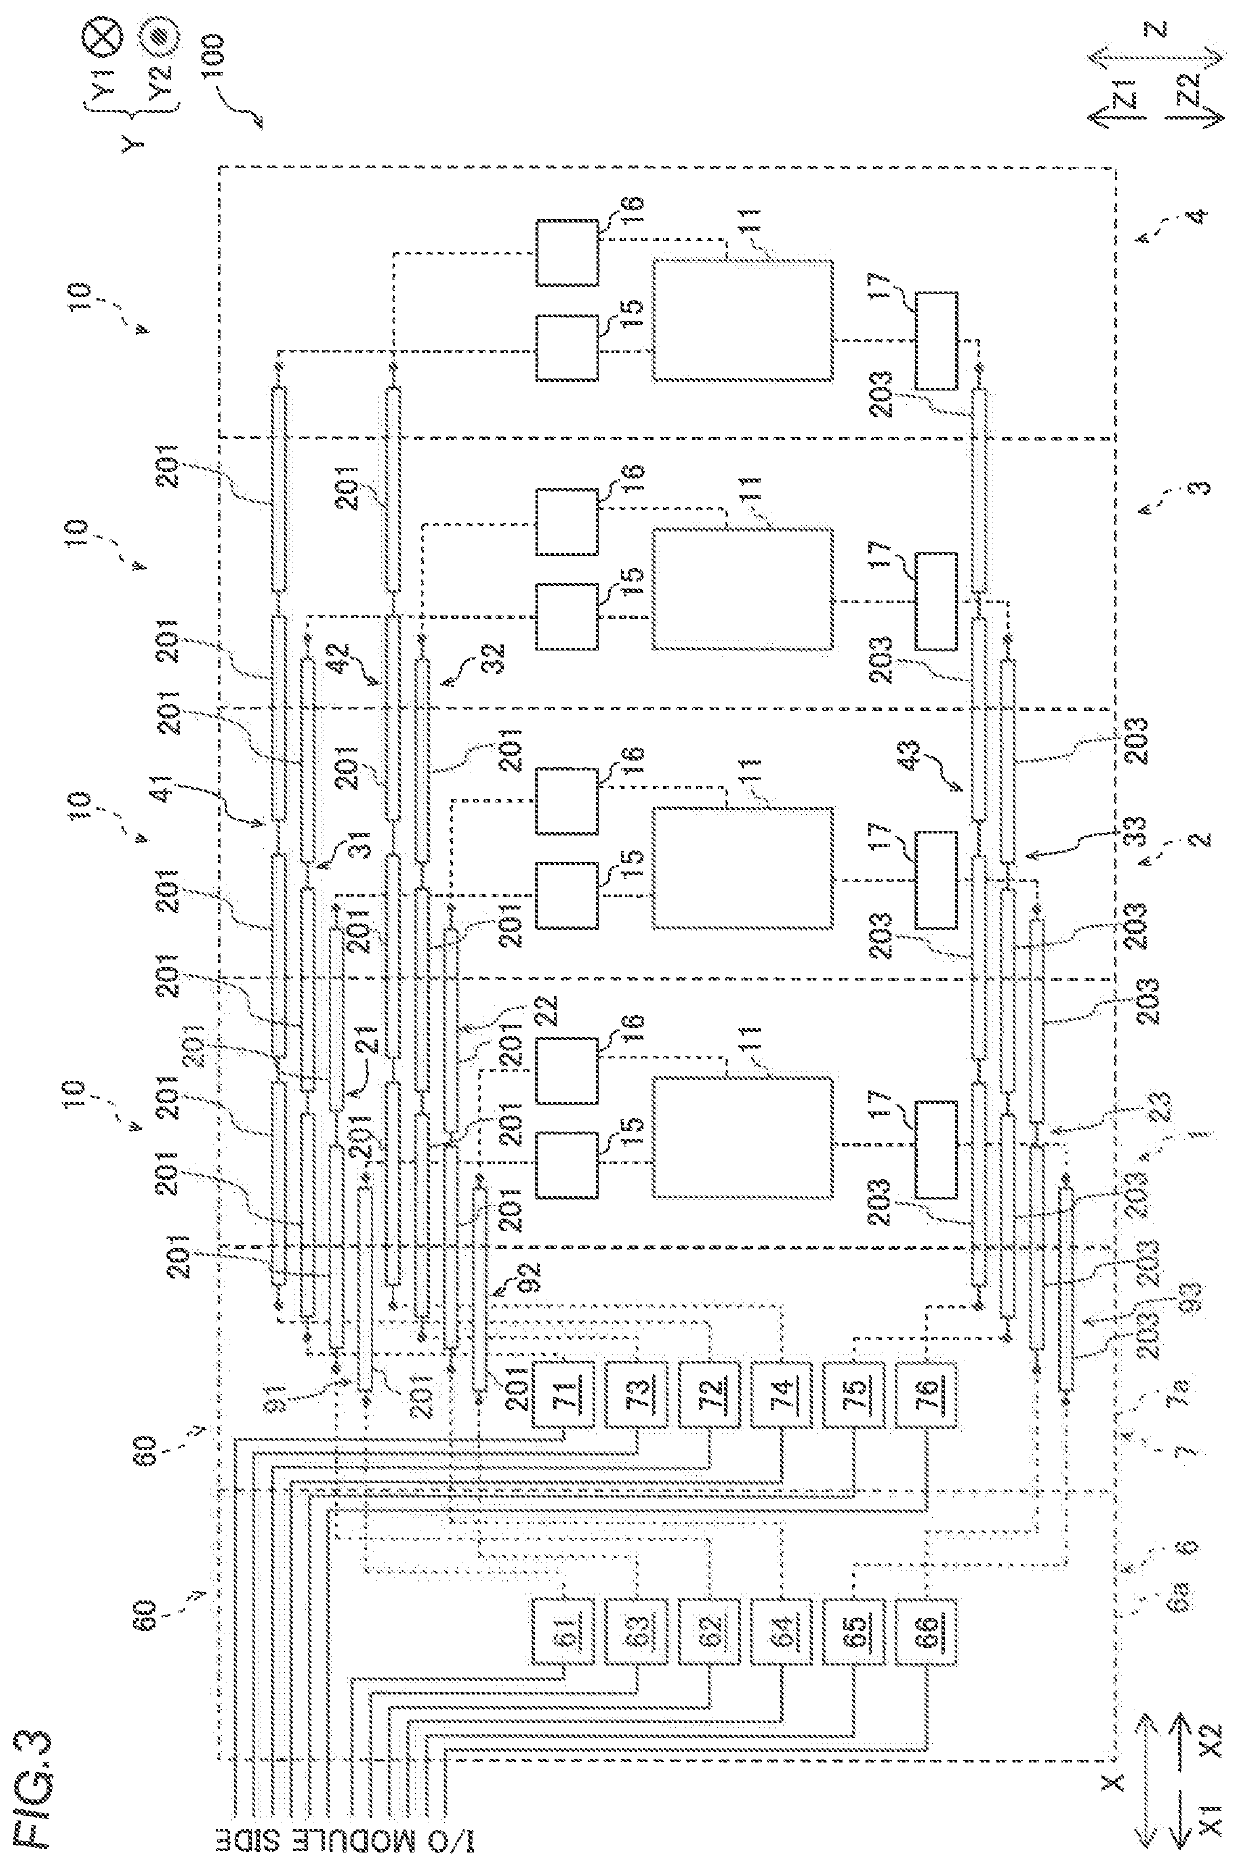 Uninterruptible power supply and disconnection module